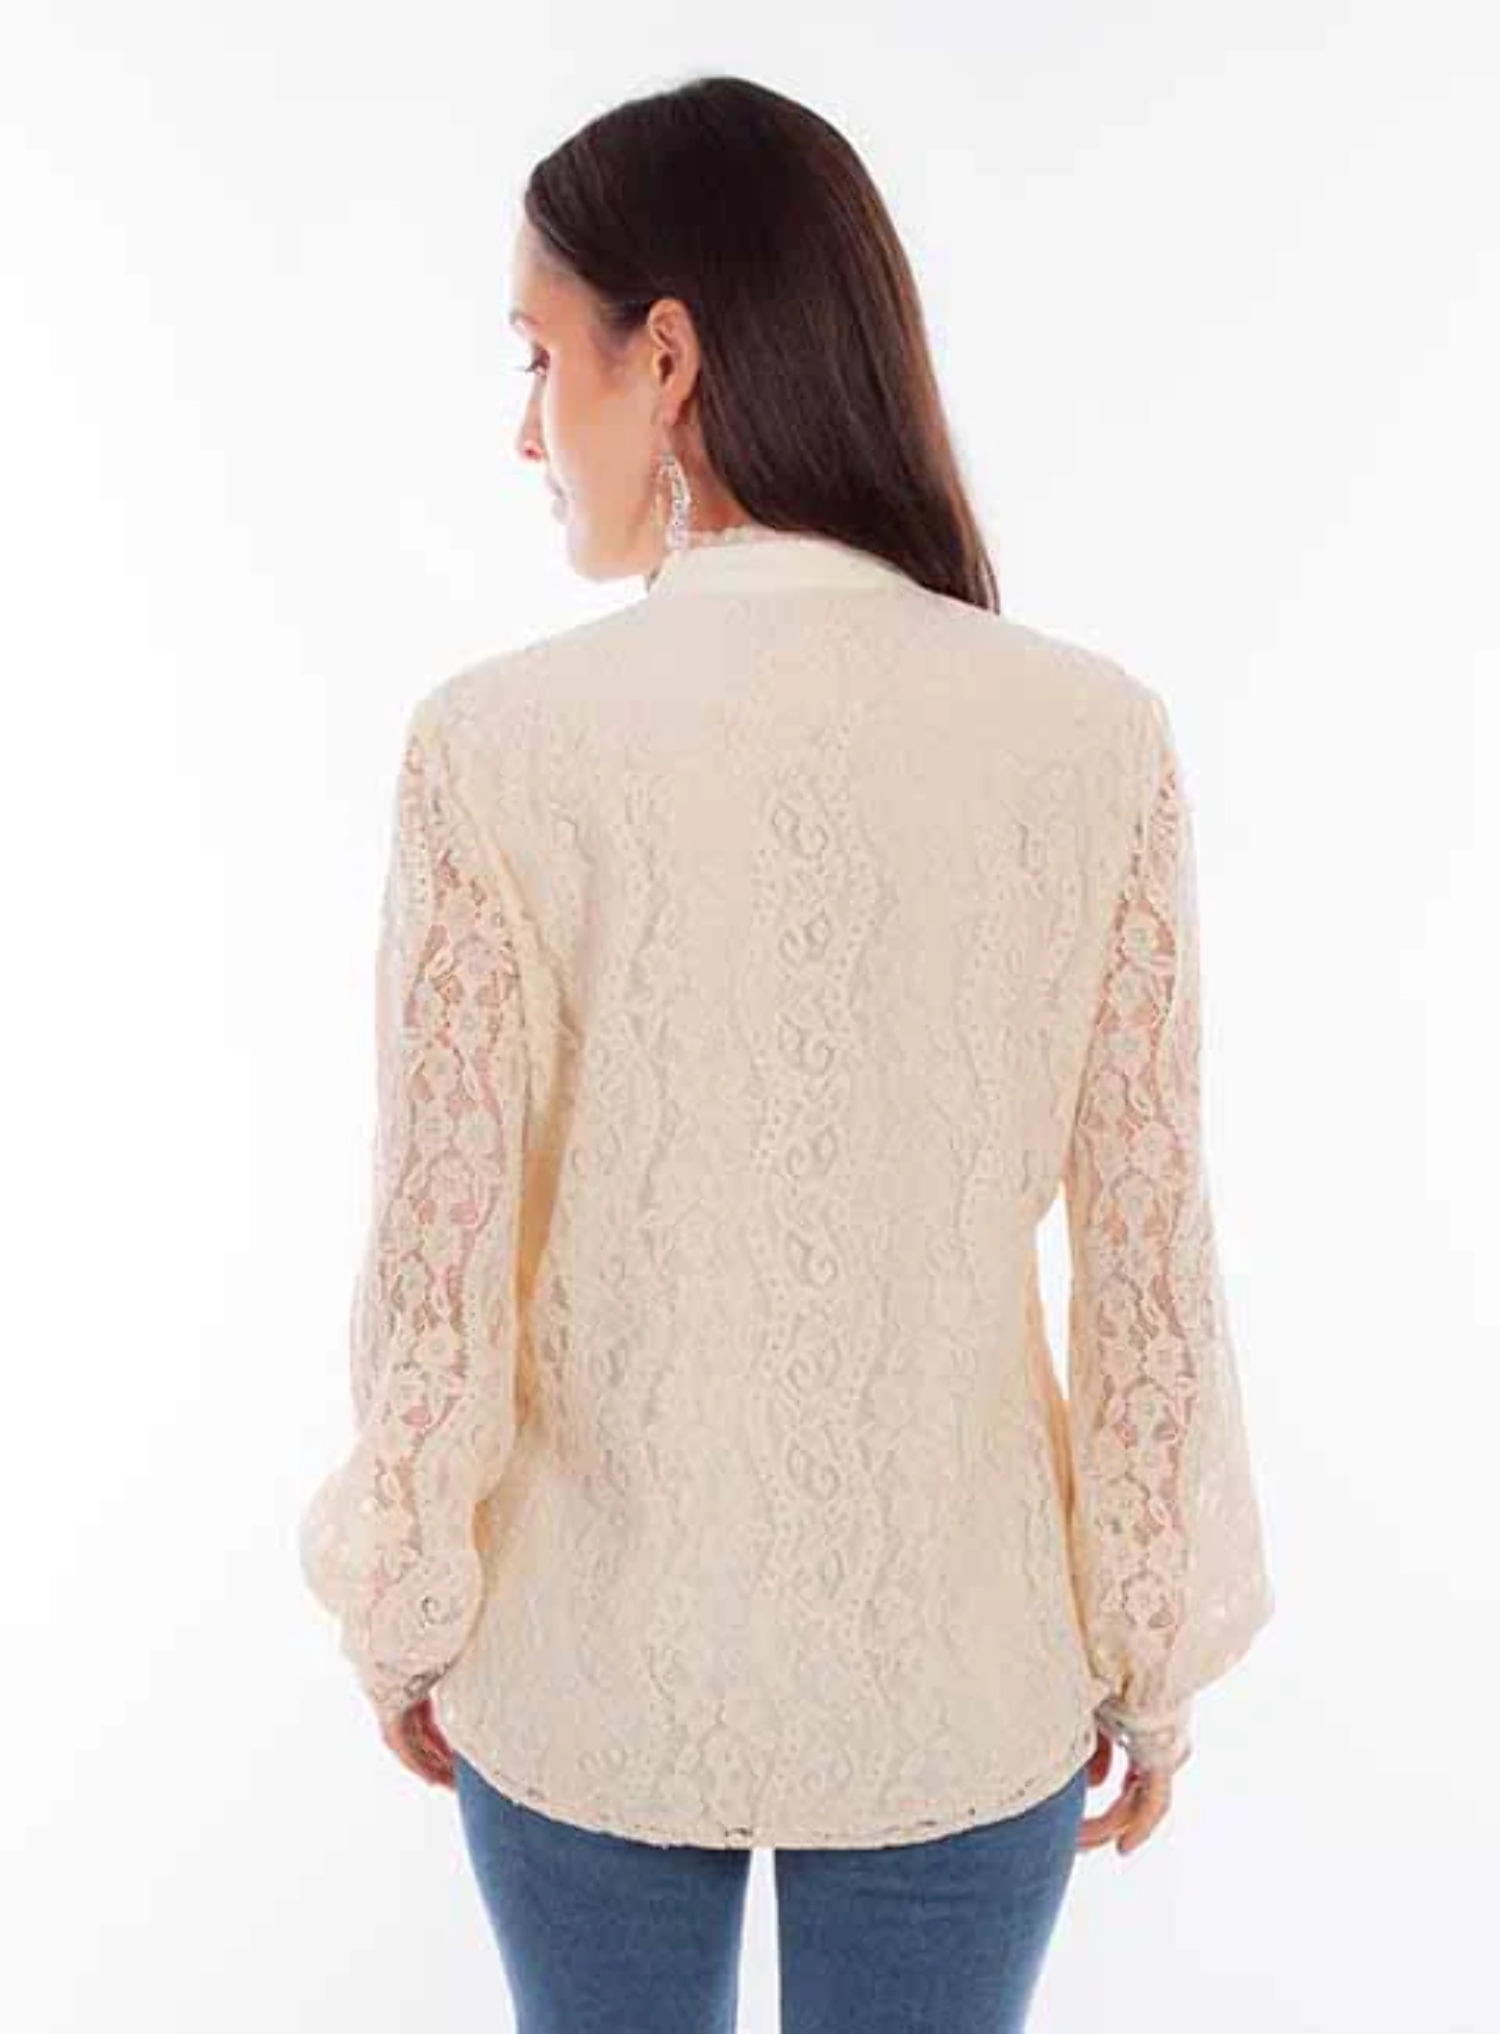 Scully Leather Honey Creek Ivory Lace Top - Walmart.com